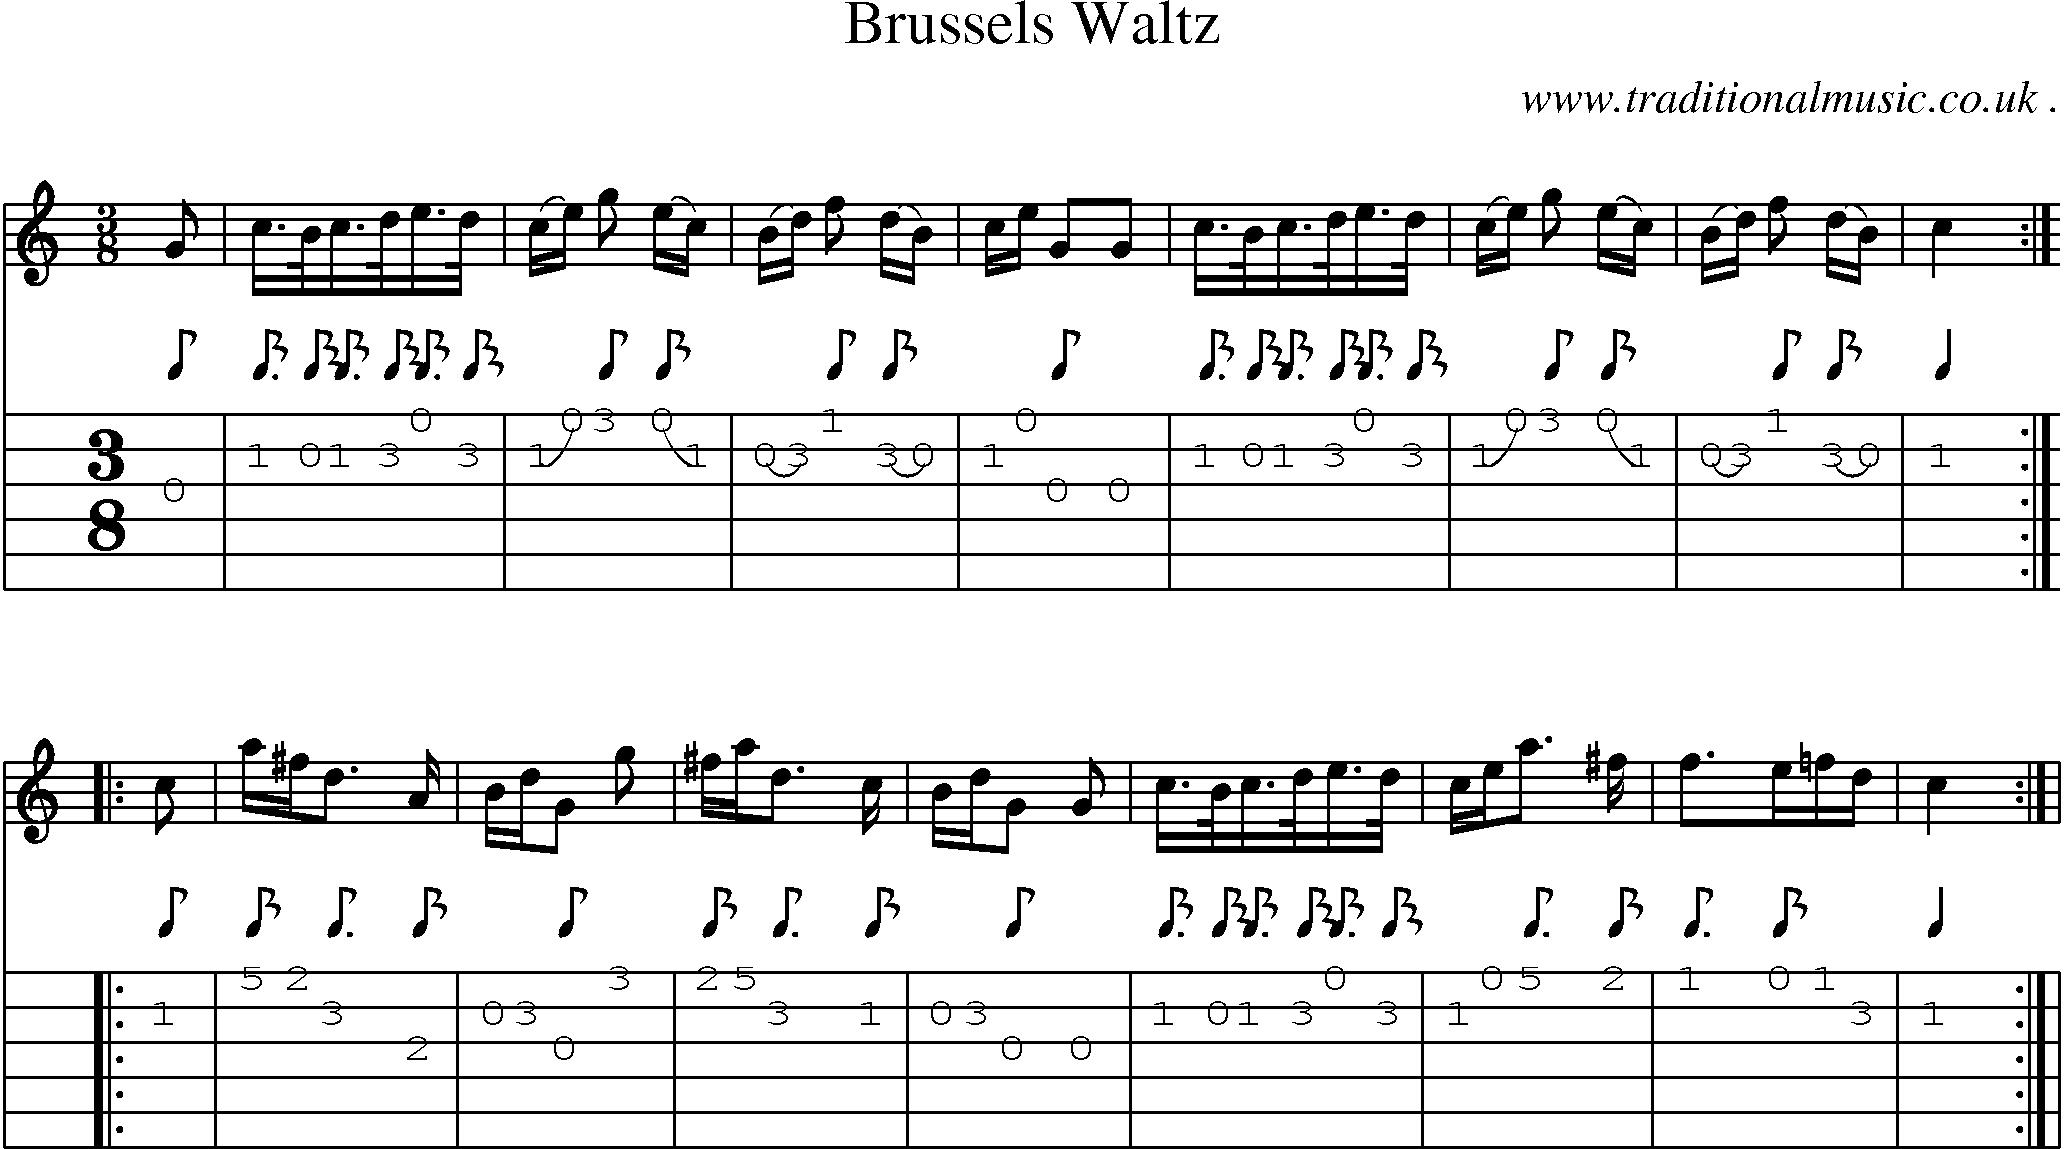 Sheet-Music and Guitar Tabs for Brussels Waltz